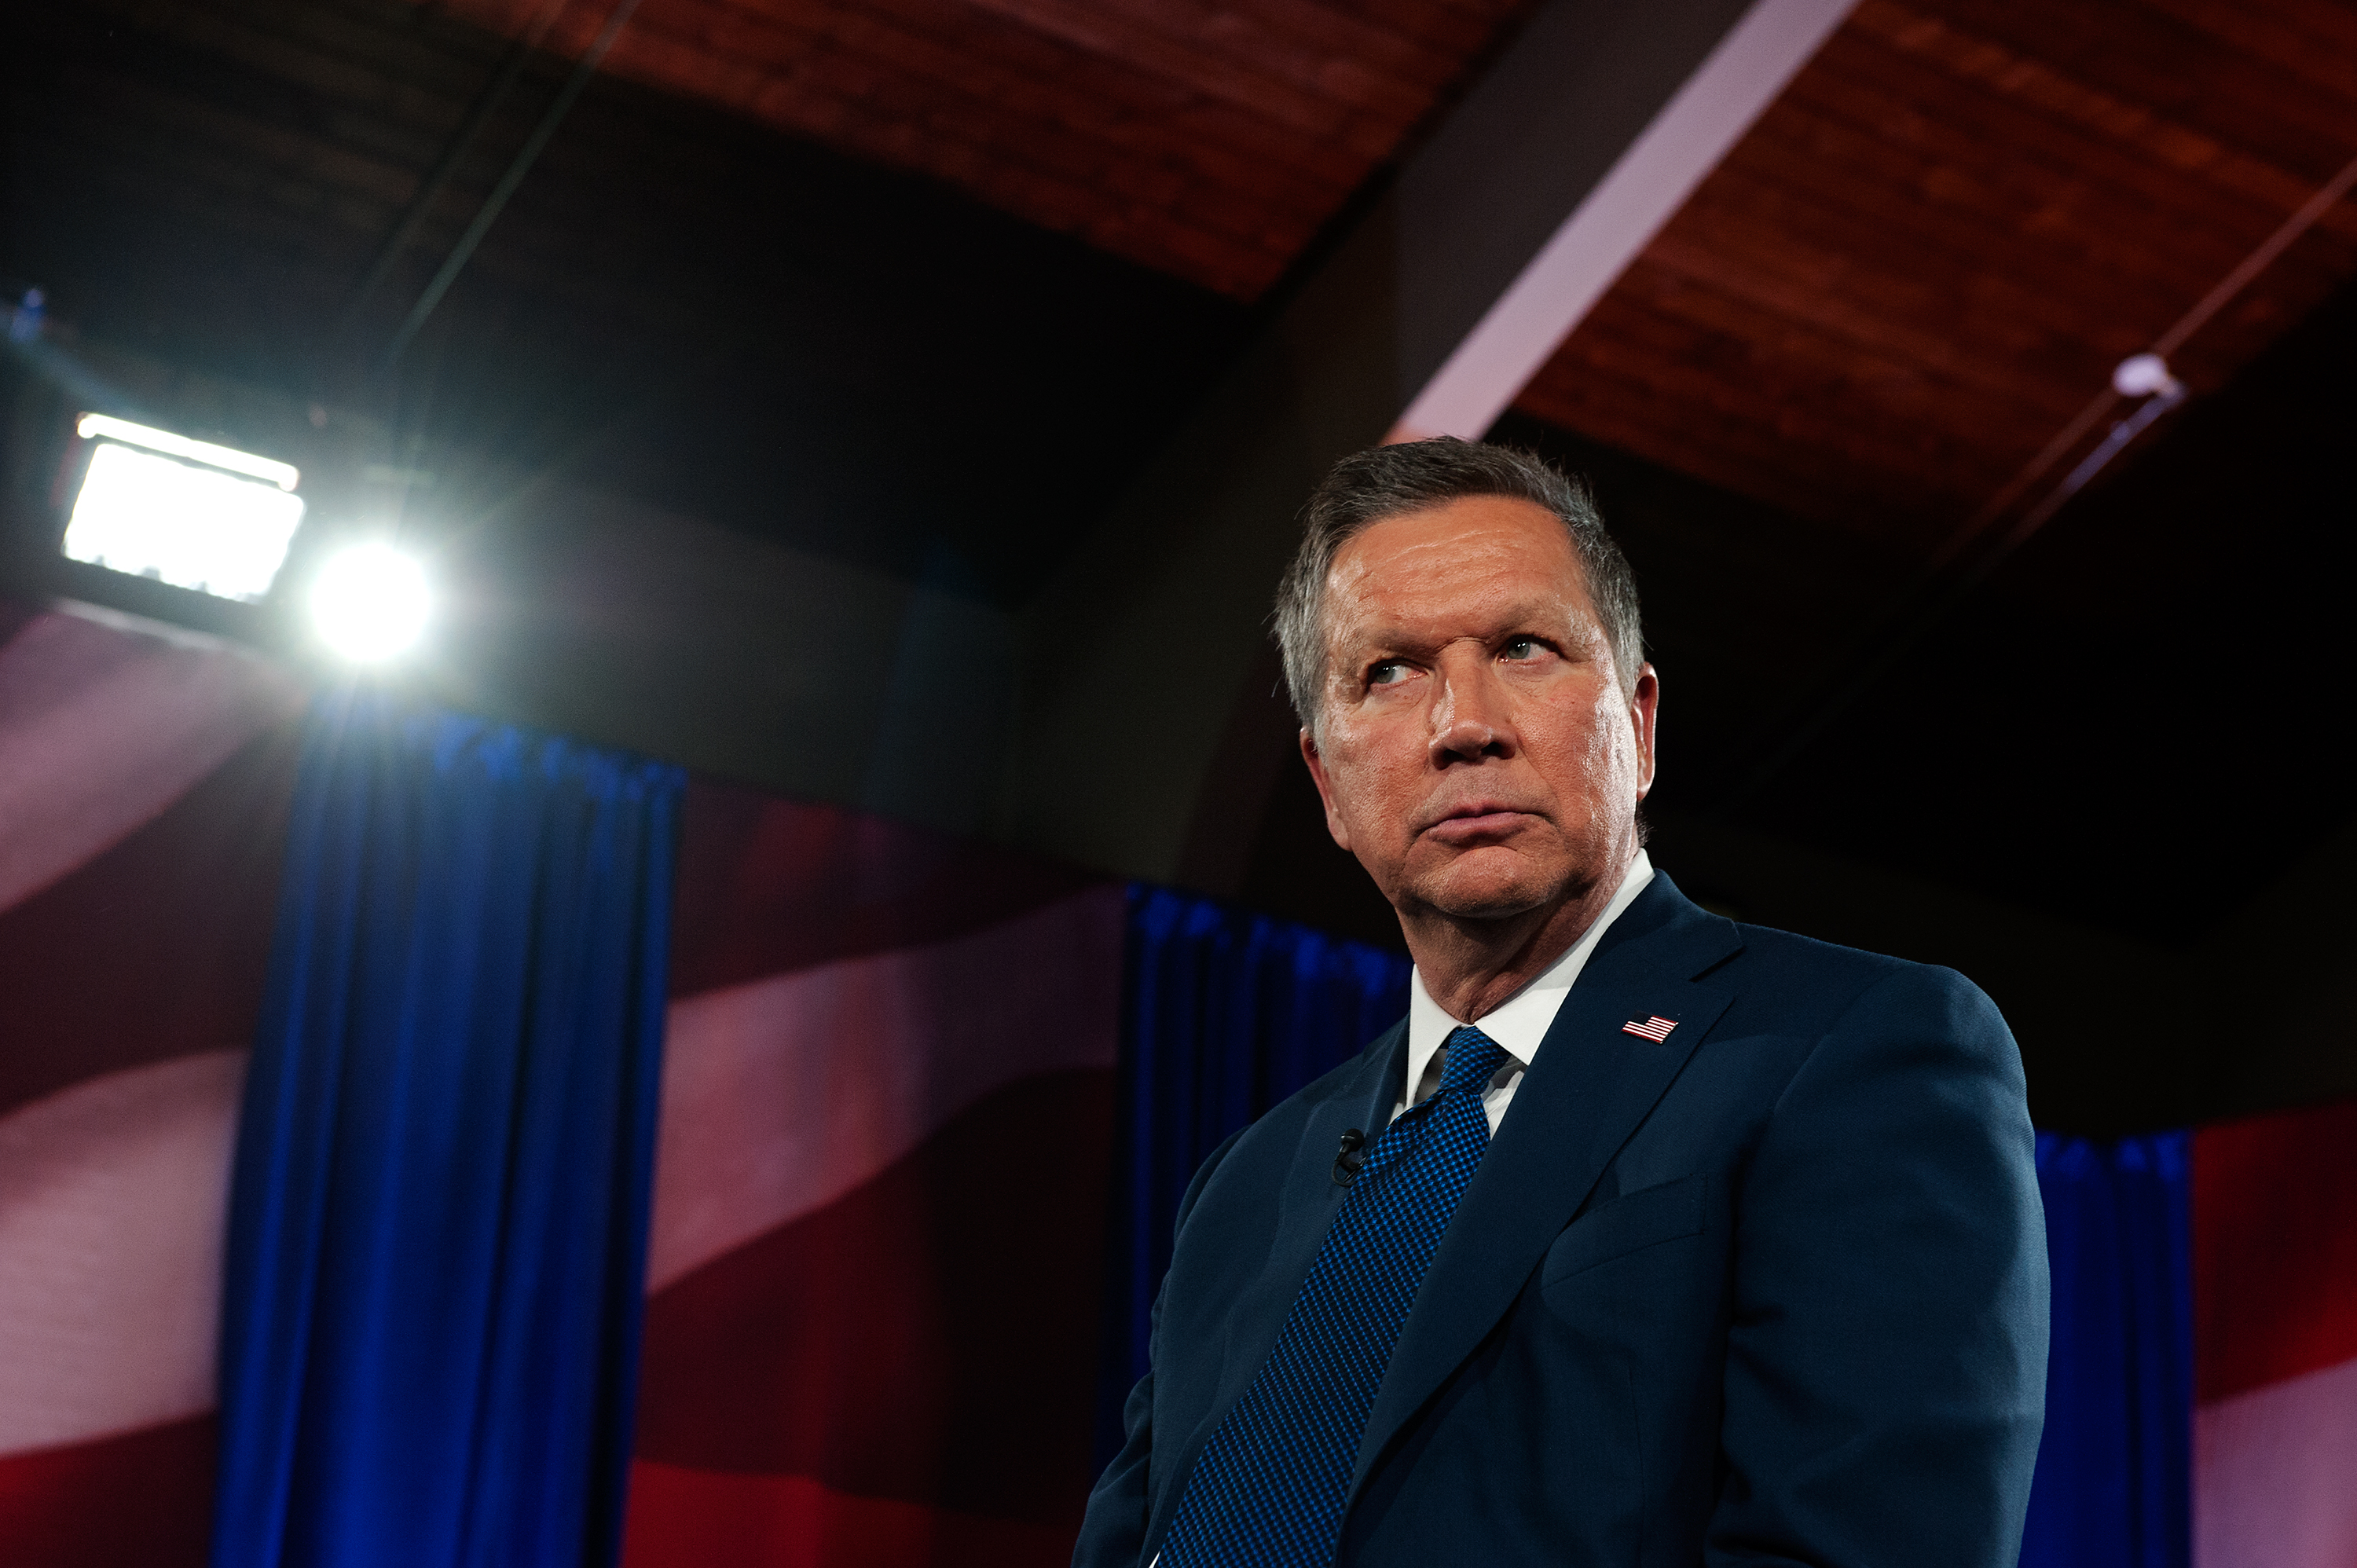 GOP Presidential Candidate John Kasich Participates In Television Town Hall Meeting